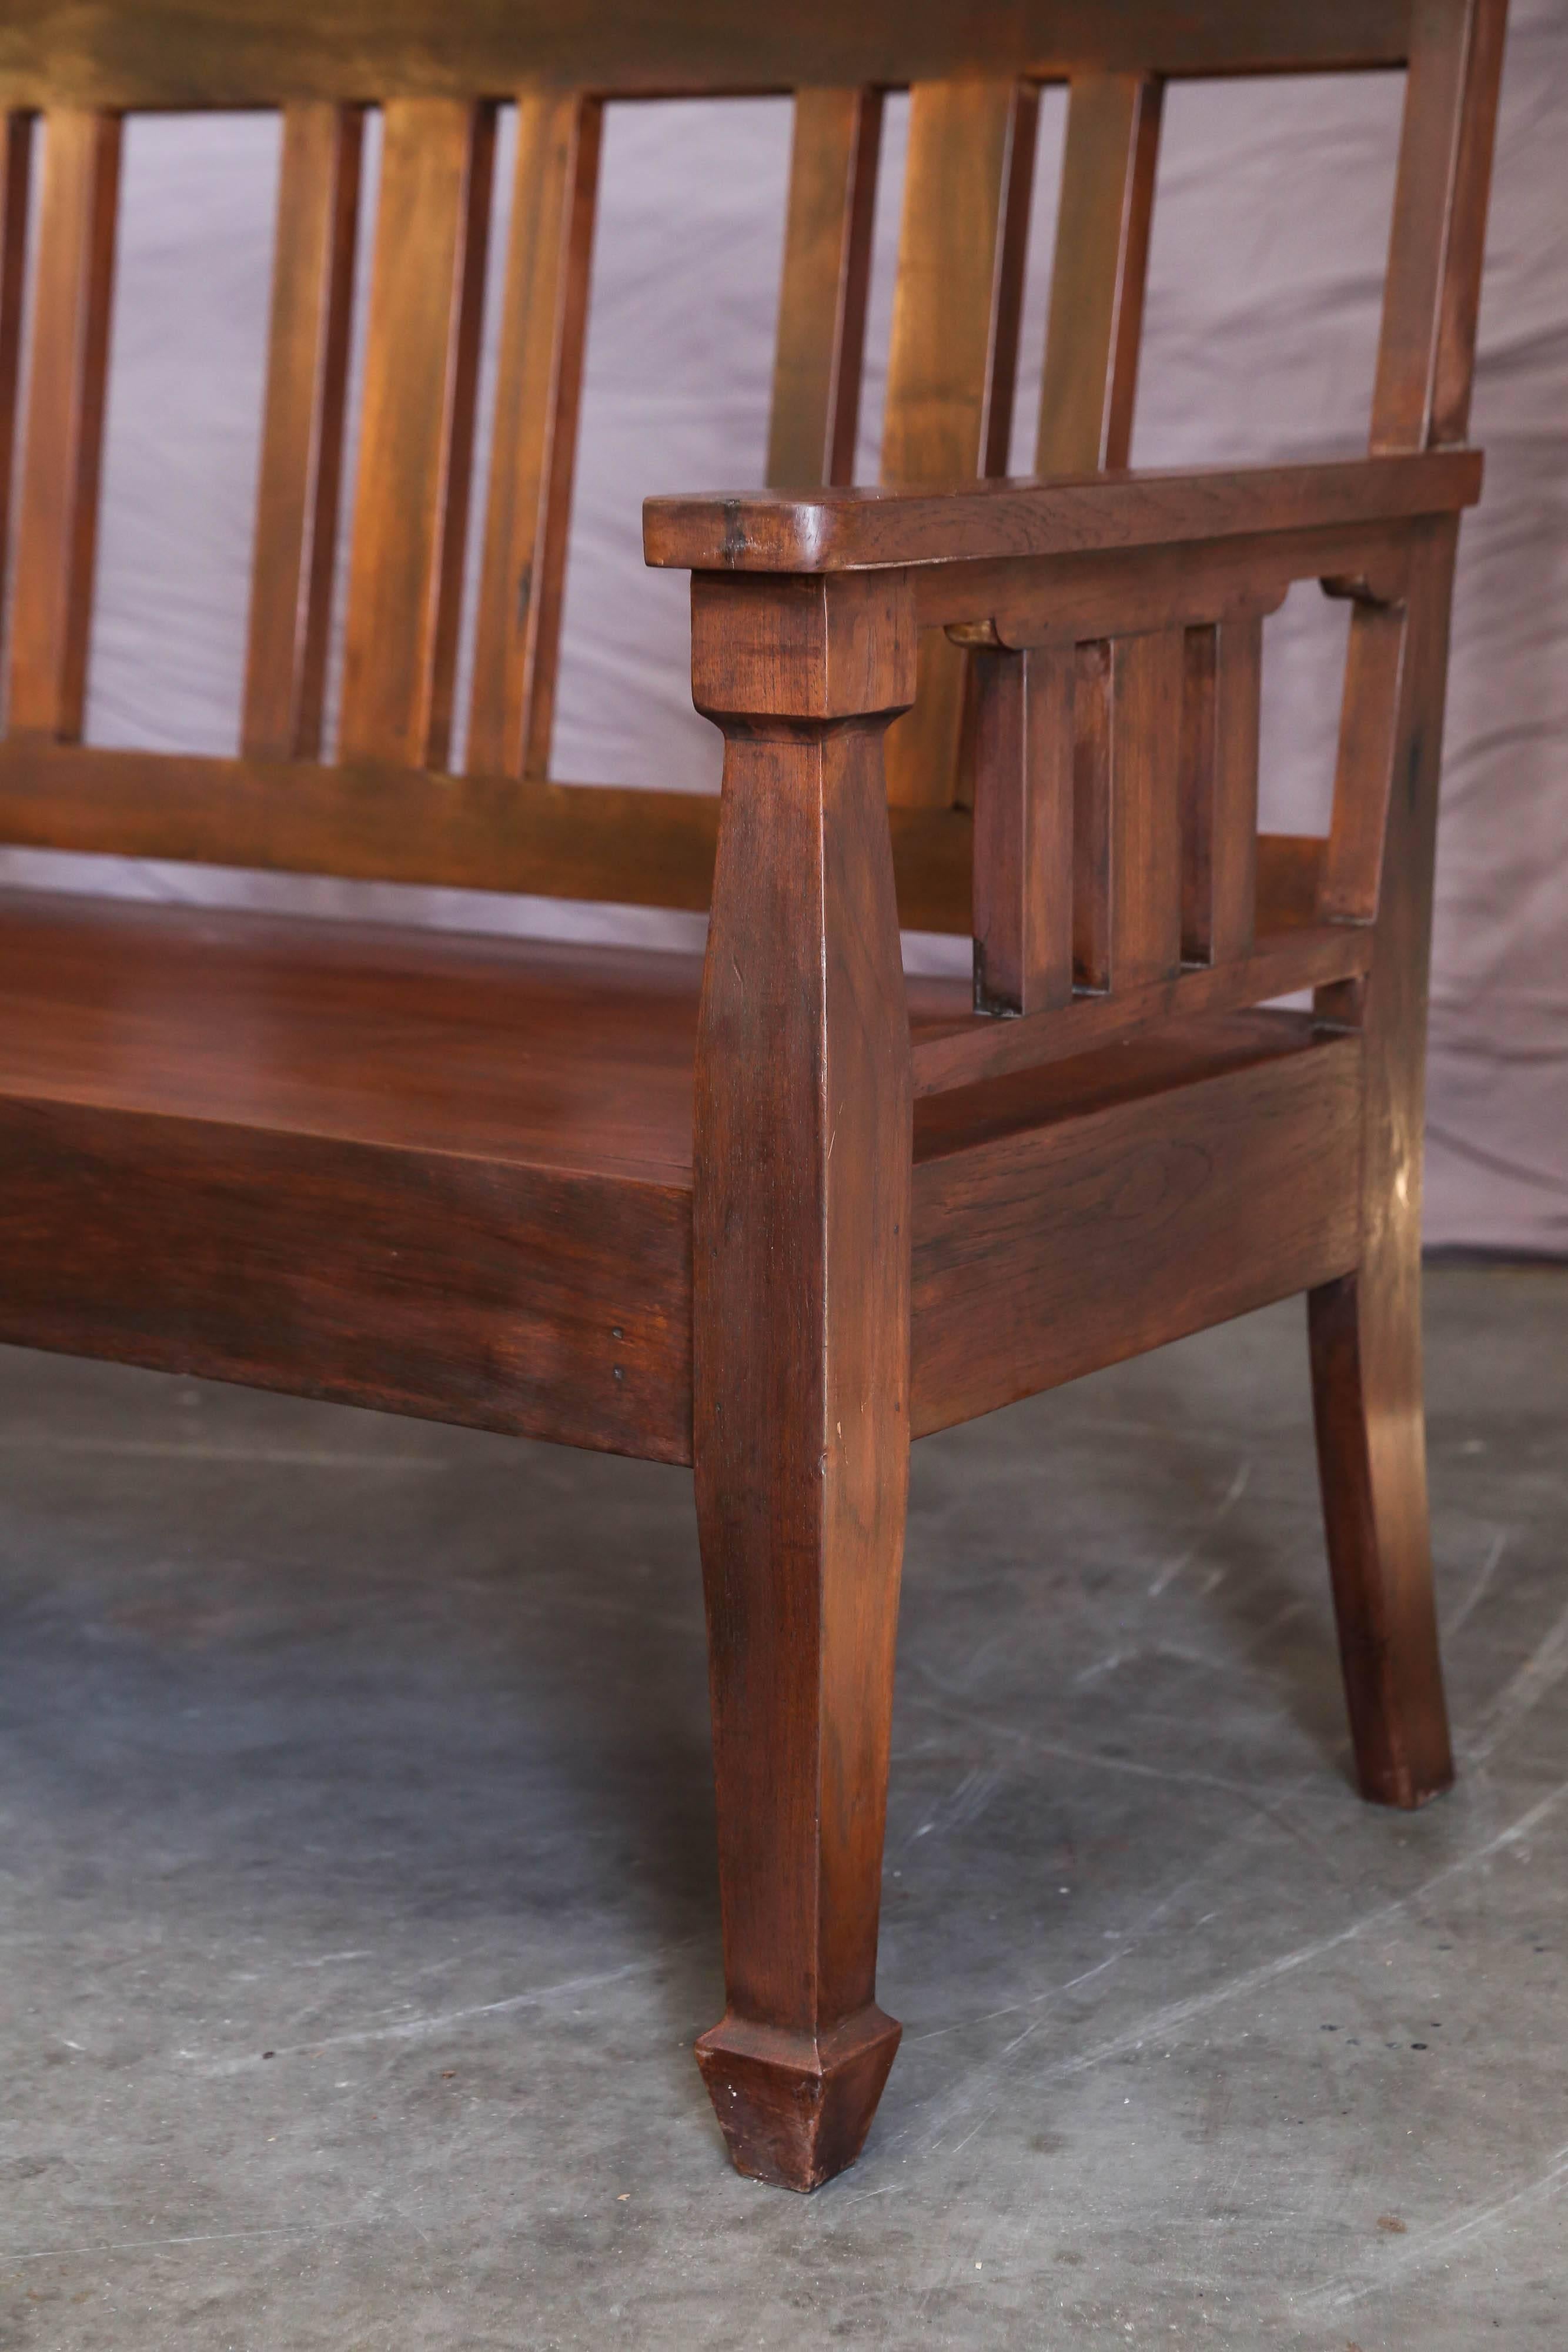 British Colonial 1890s Solid Teak Wood Typical Tea Plantation Bench from Darjeeling For Sale